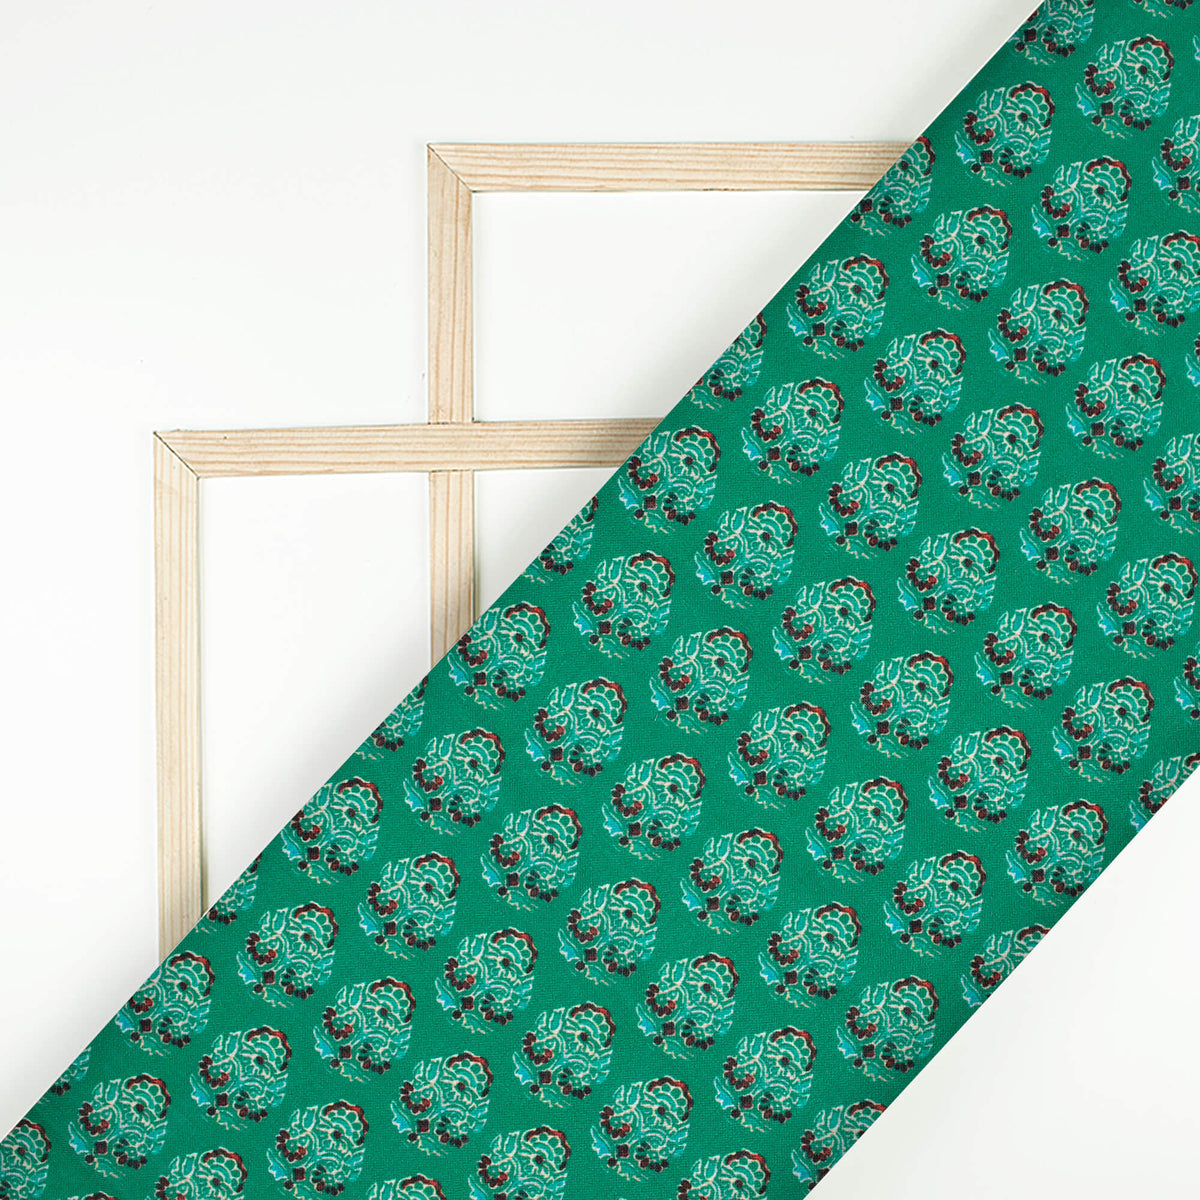 Dark Green And Red Floral Pattern Digital Print Linen Textured Fabric (Width 56 Inches)